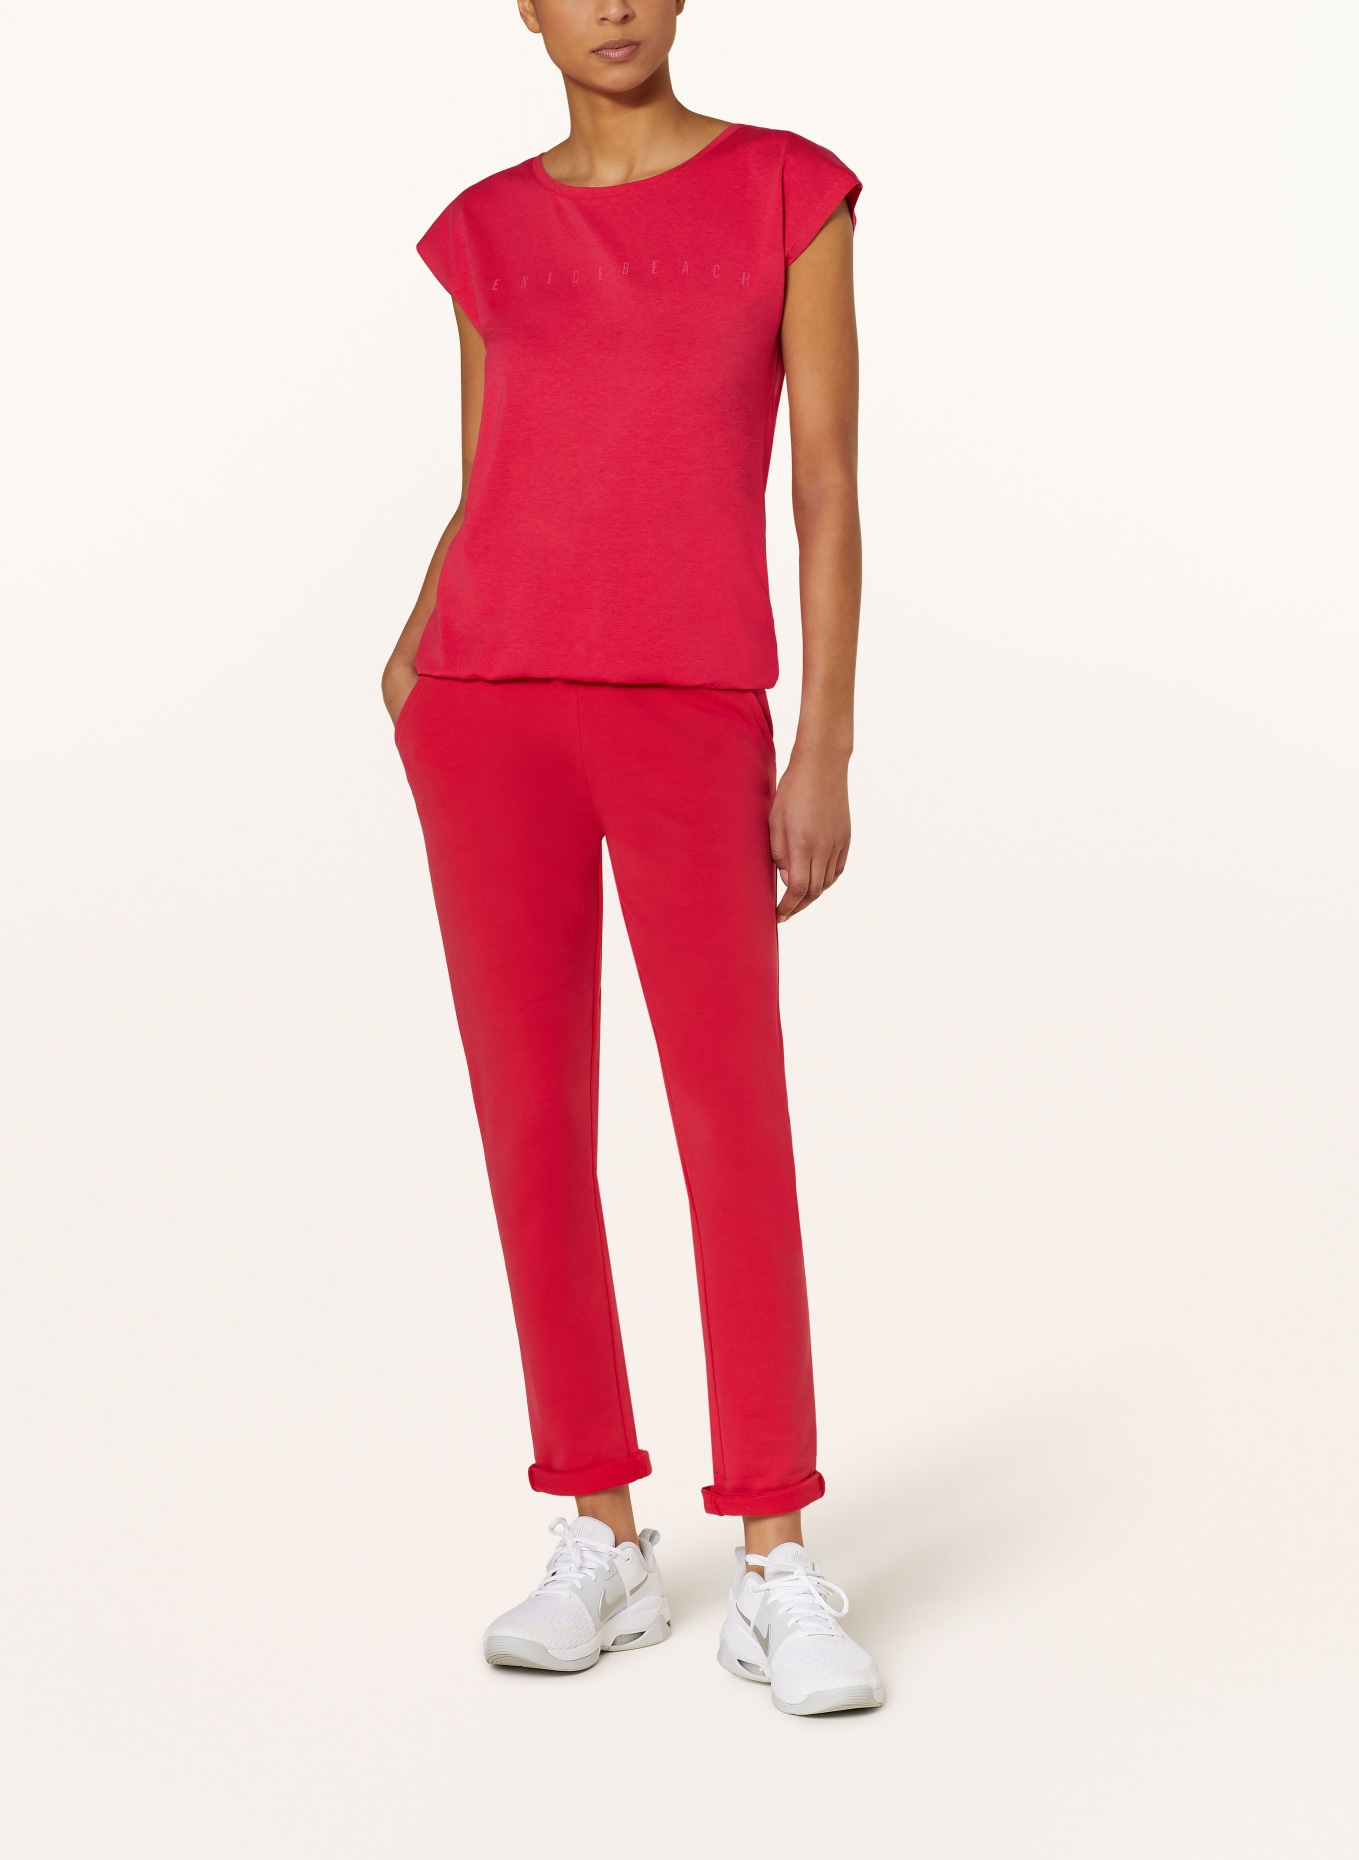 VENICE BEACH Sweatpants SHERLY, Color: RED (Image 2)